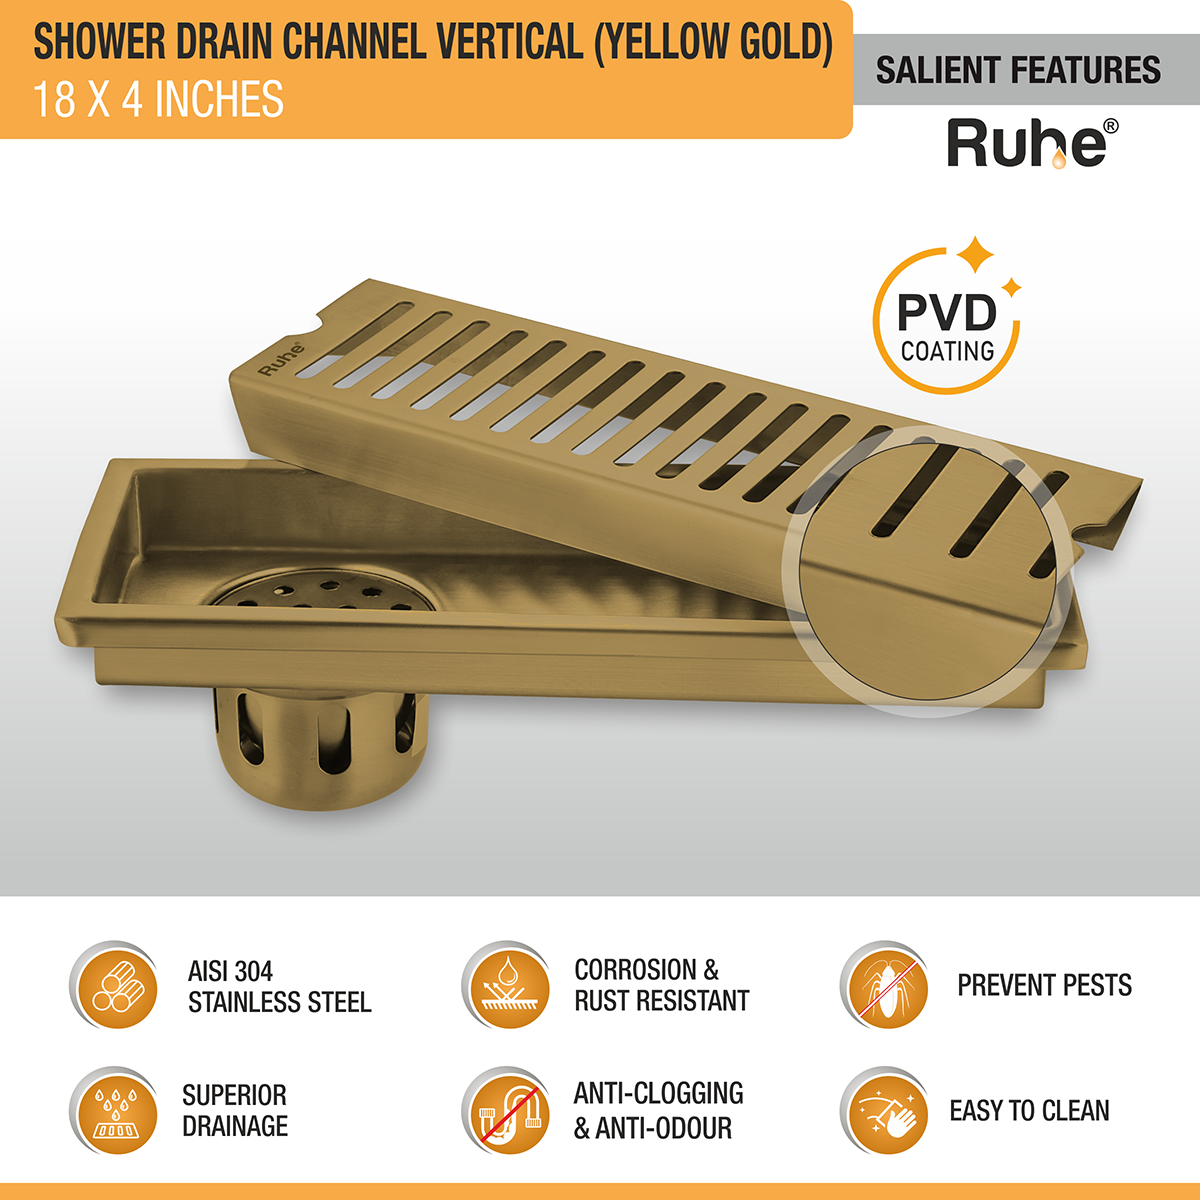 Vertical Shower Drain Channel (18 x 4 Inches) YELLOW GOLD features